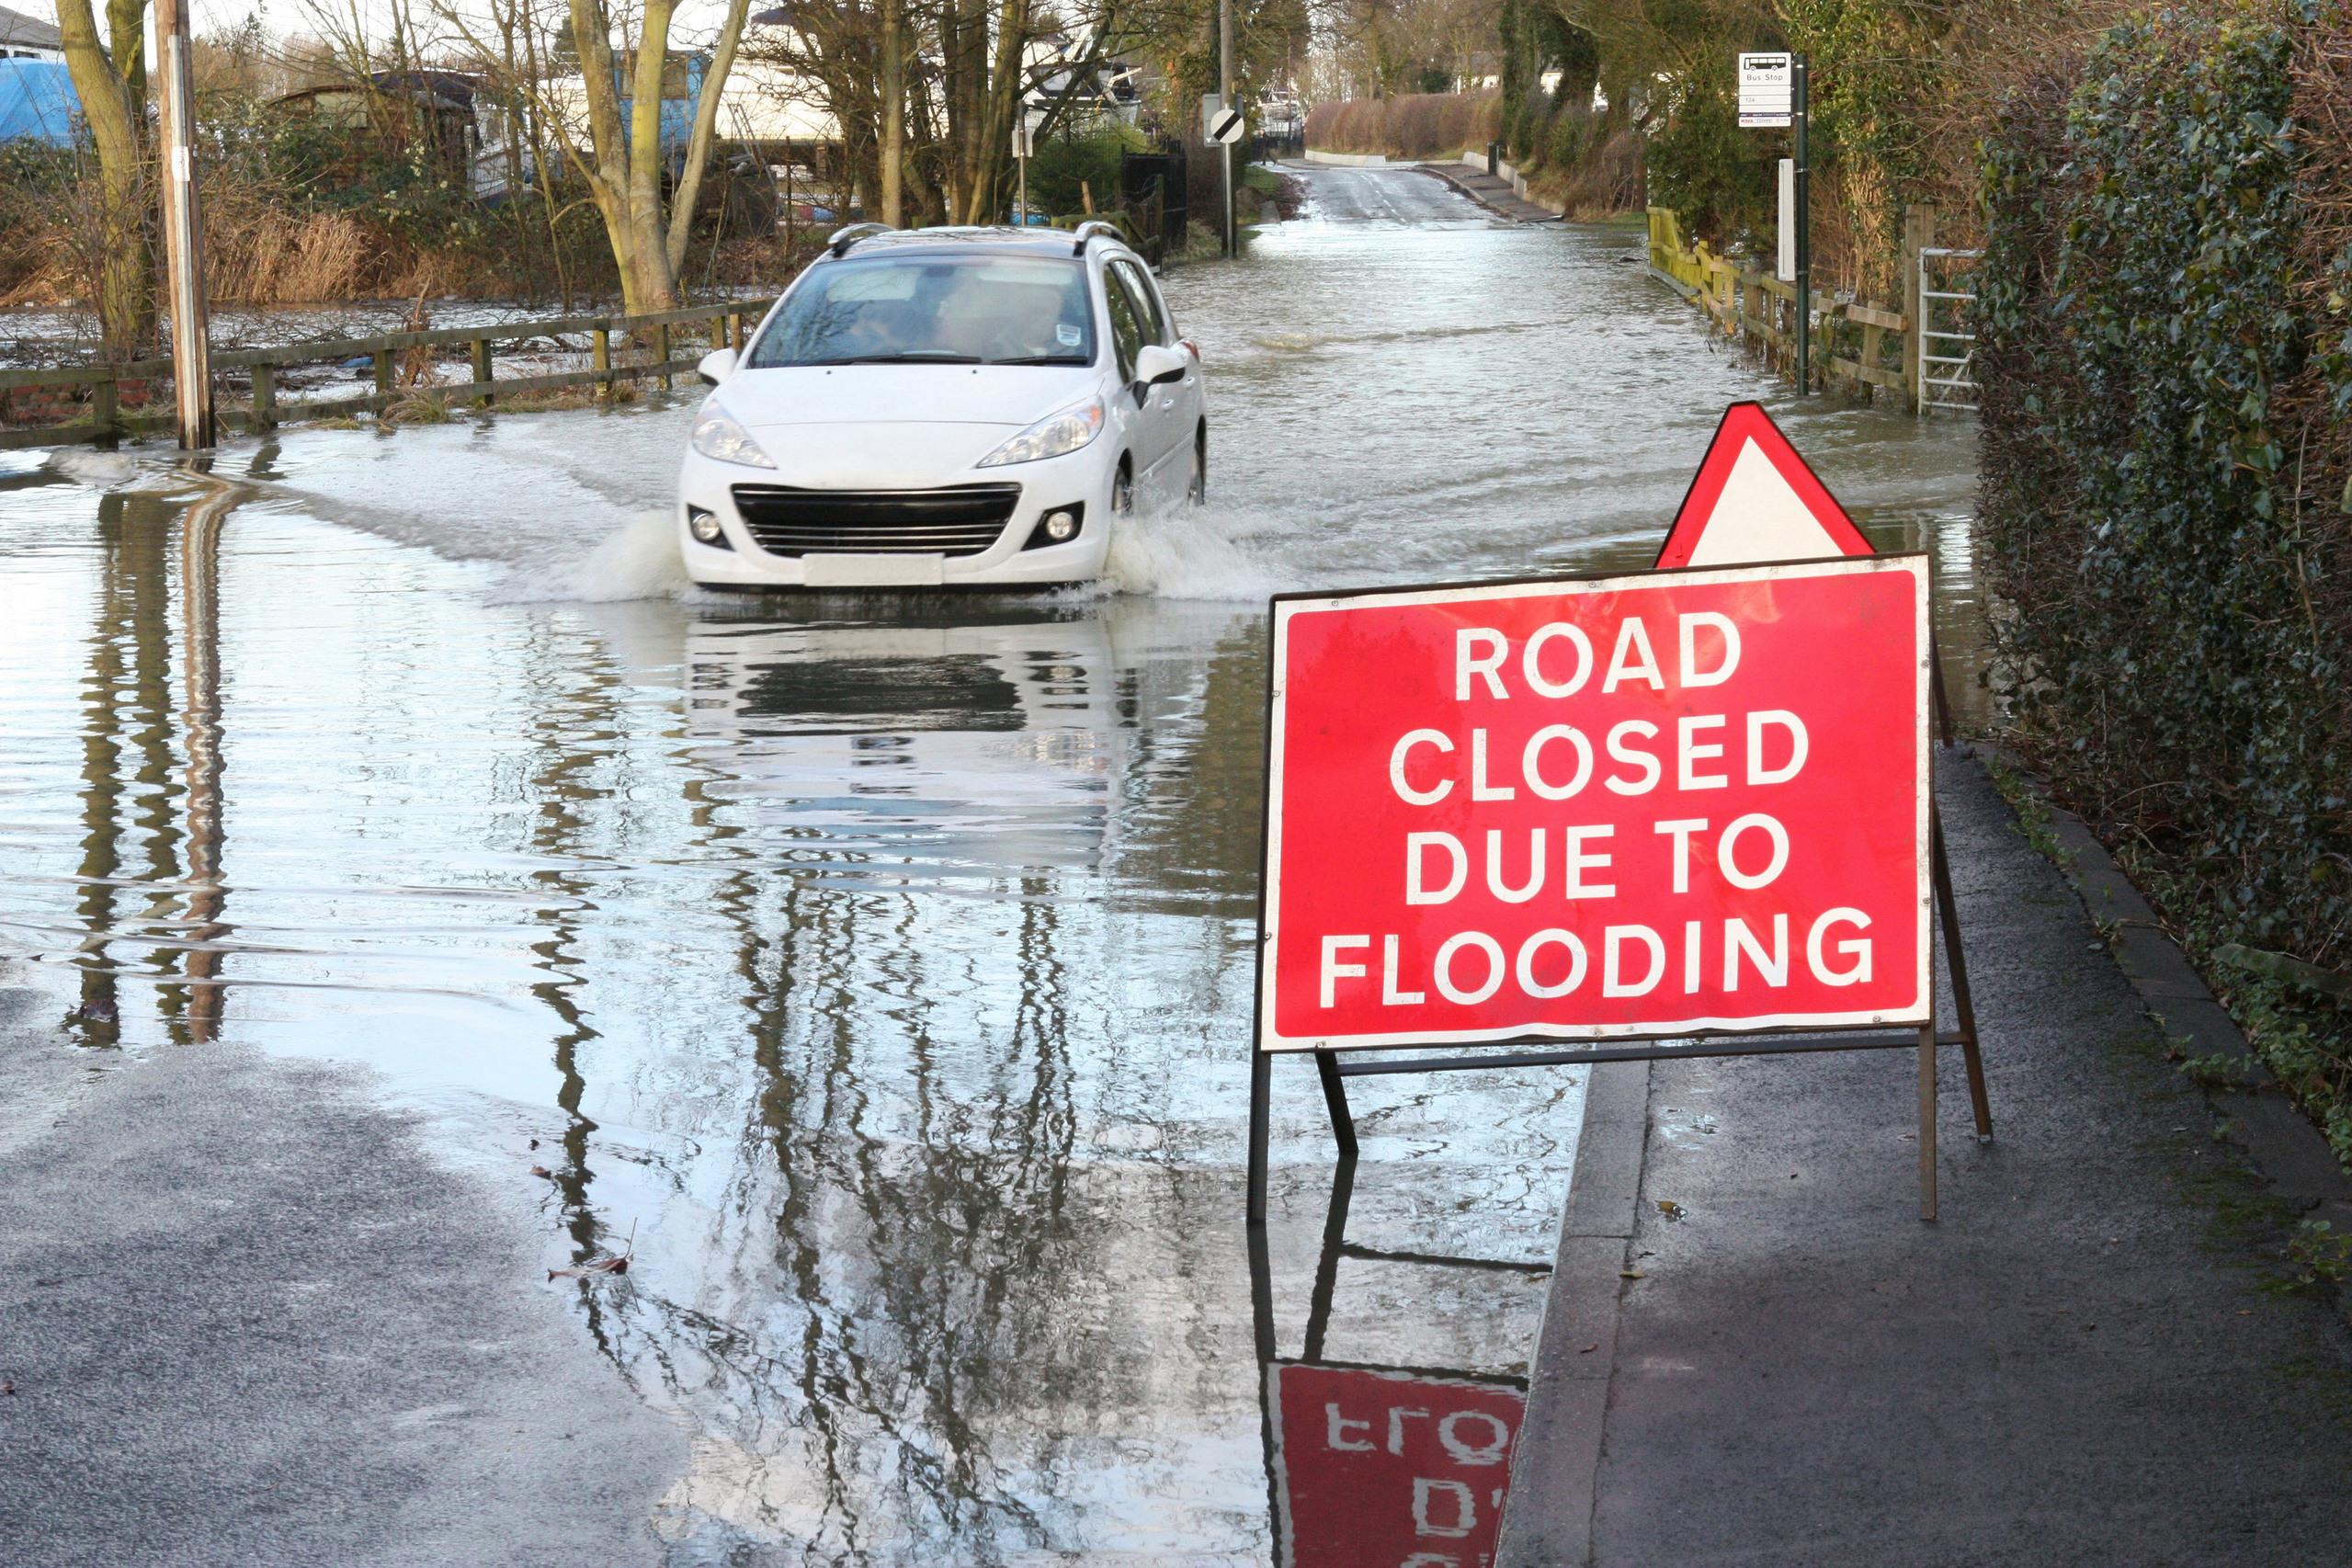 A car driving through a flooded road and ignoring a road closed because of flooding sign.